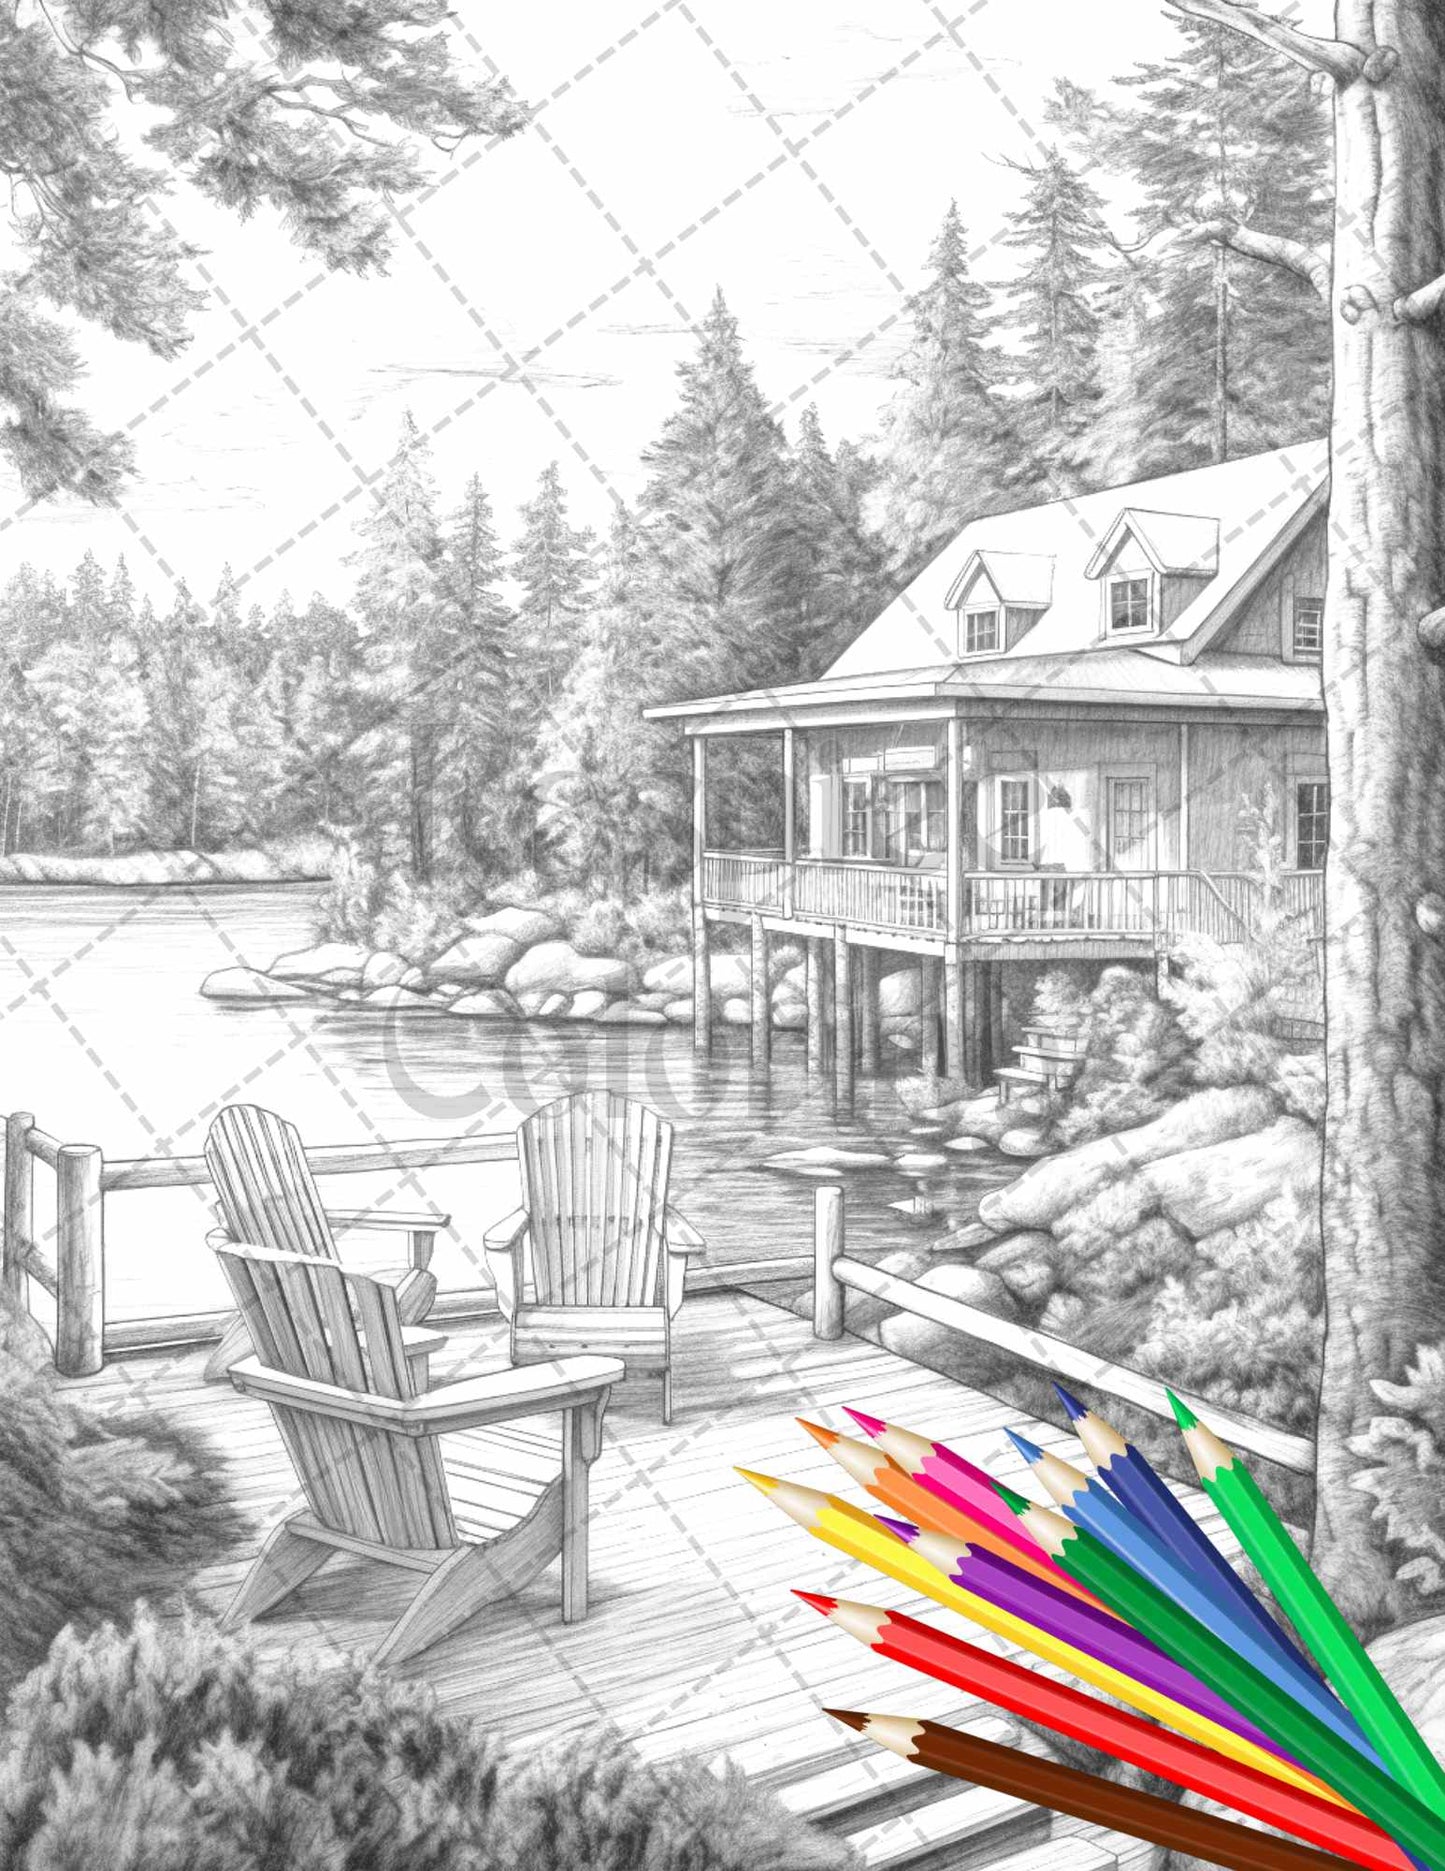 Lake Cabin Scenery Grayscale Coloring Pages Printable for Adults, PDF File Instant Download - raspiee